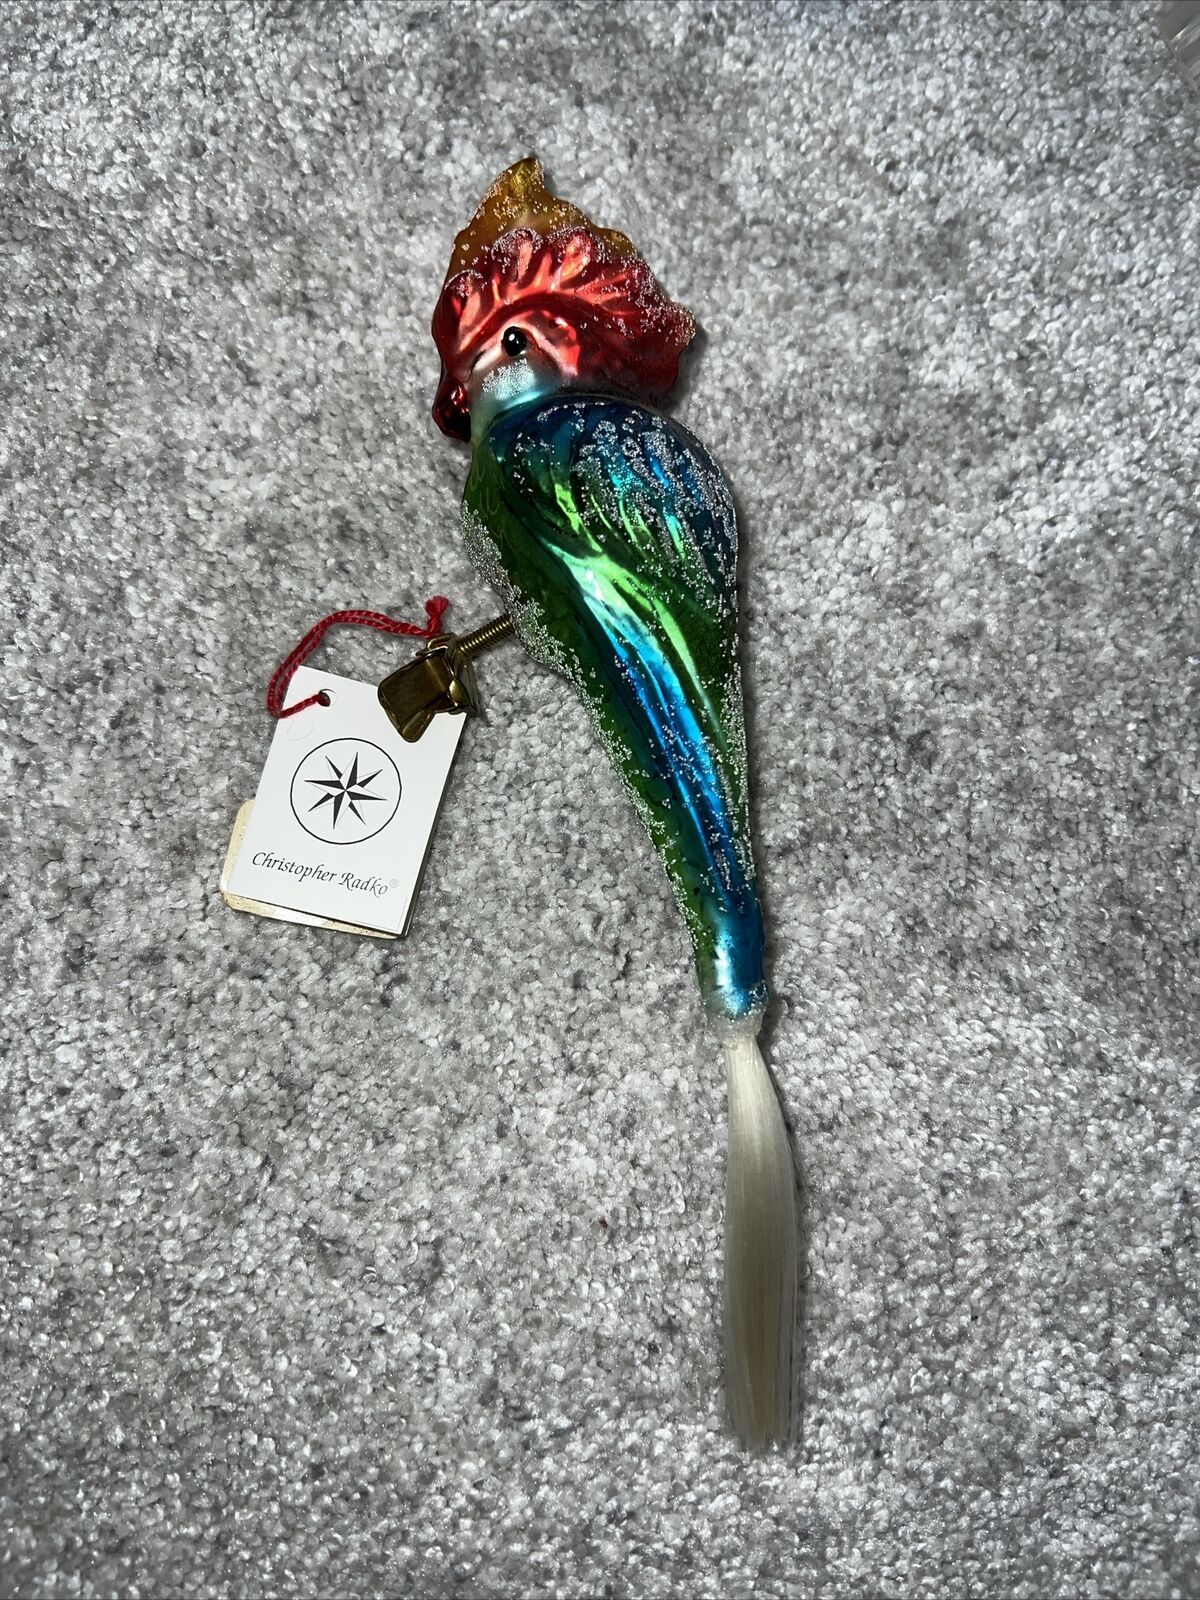 Vintage Christopher Radio Budgie Clip On Glass Ornament